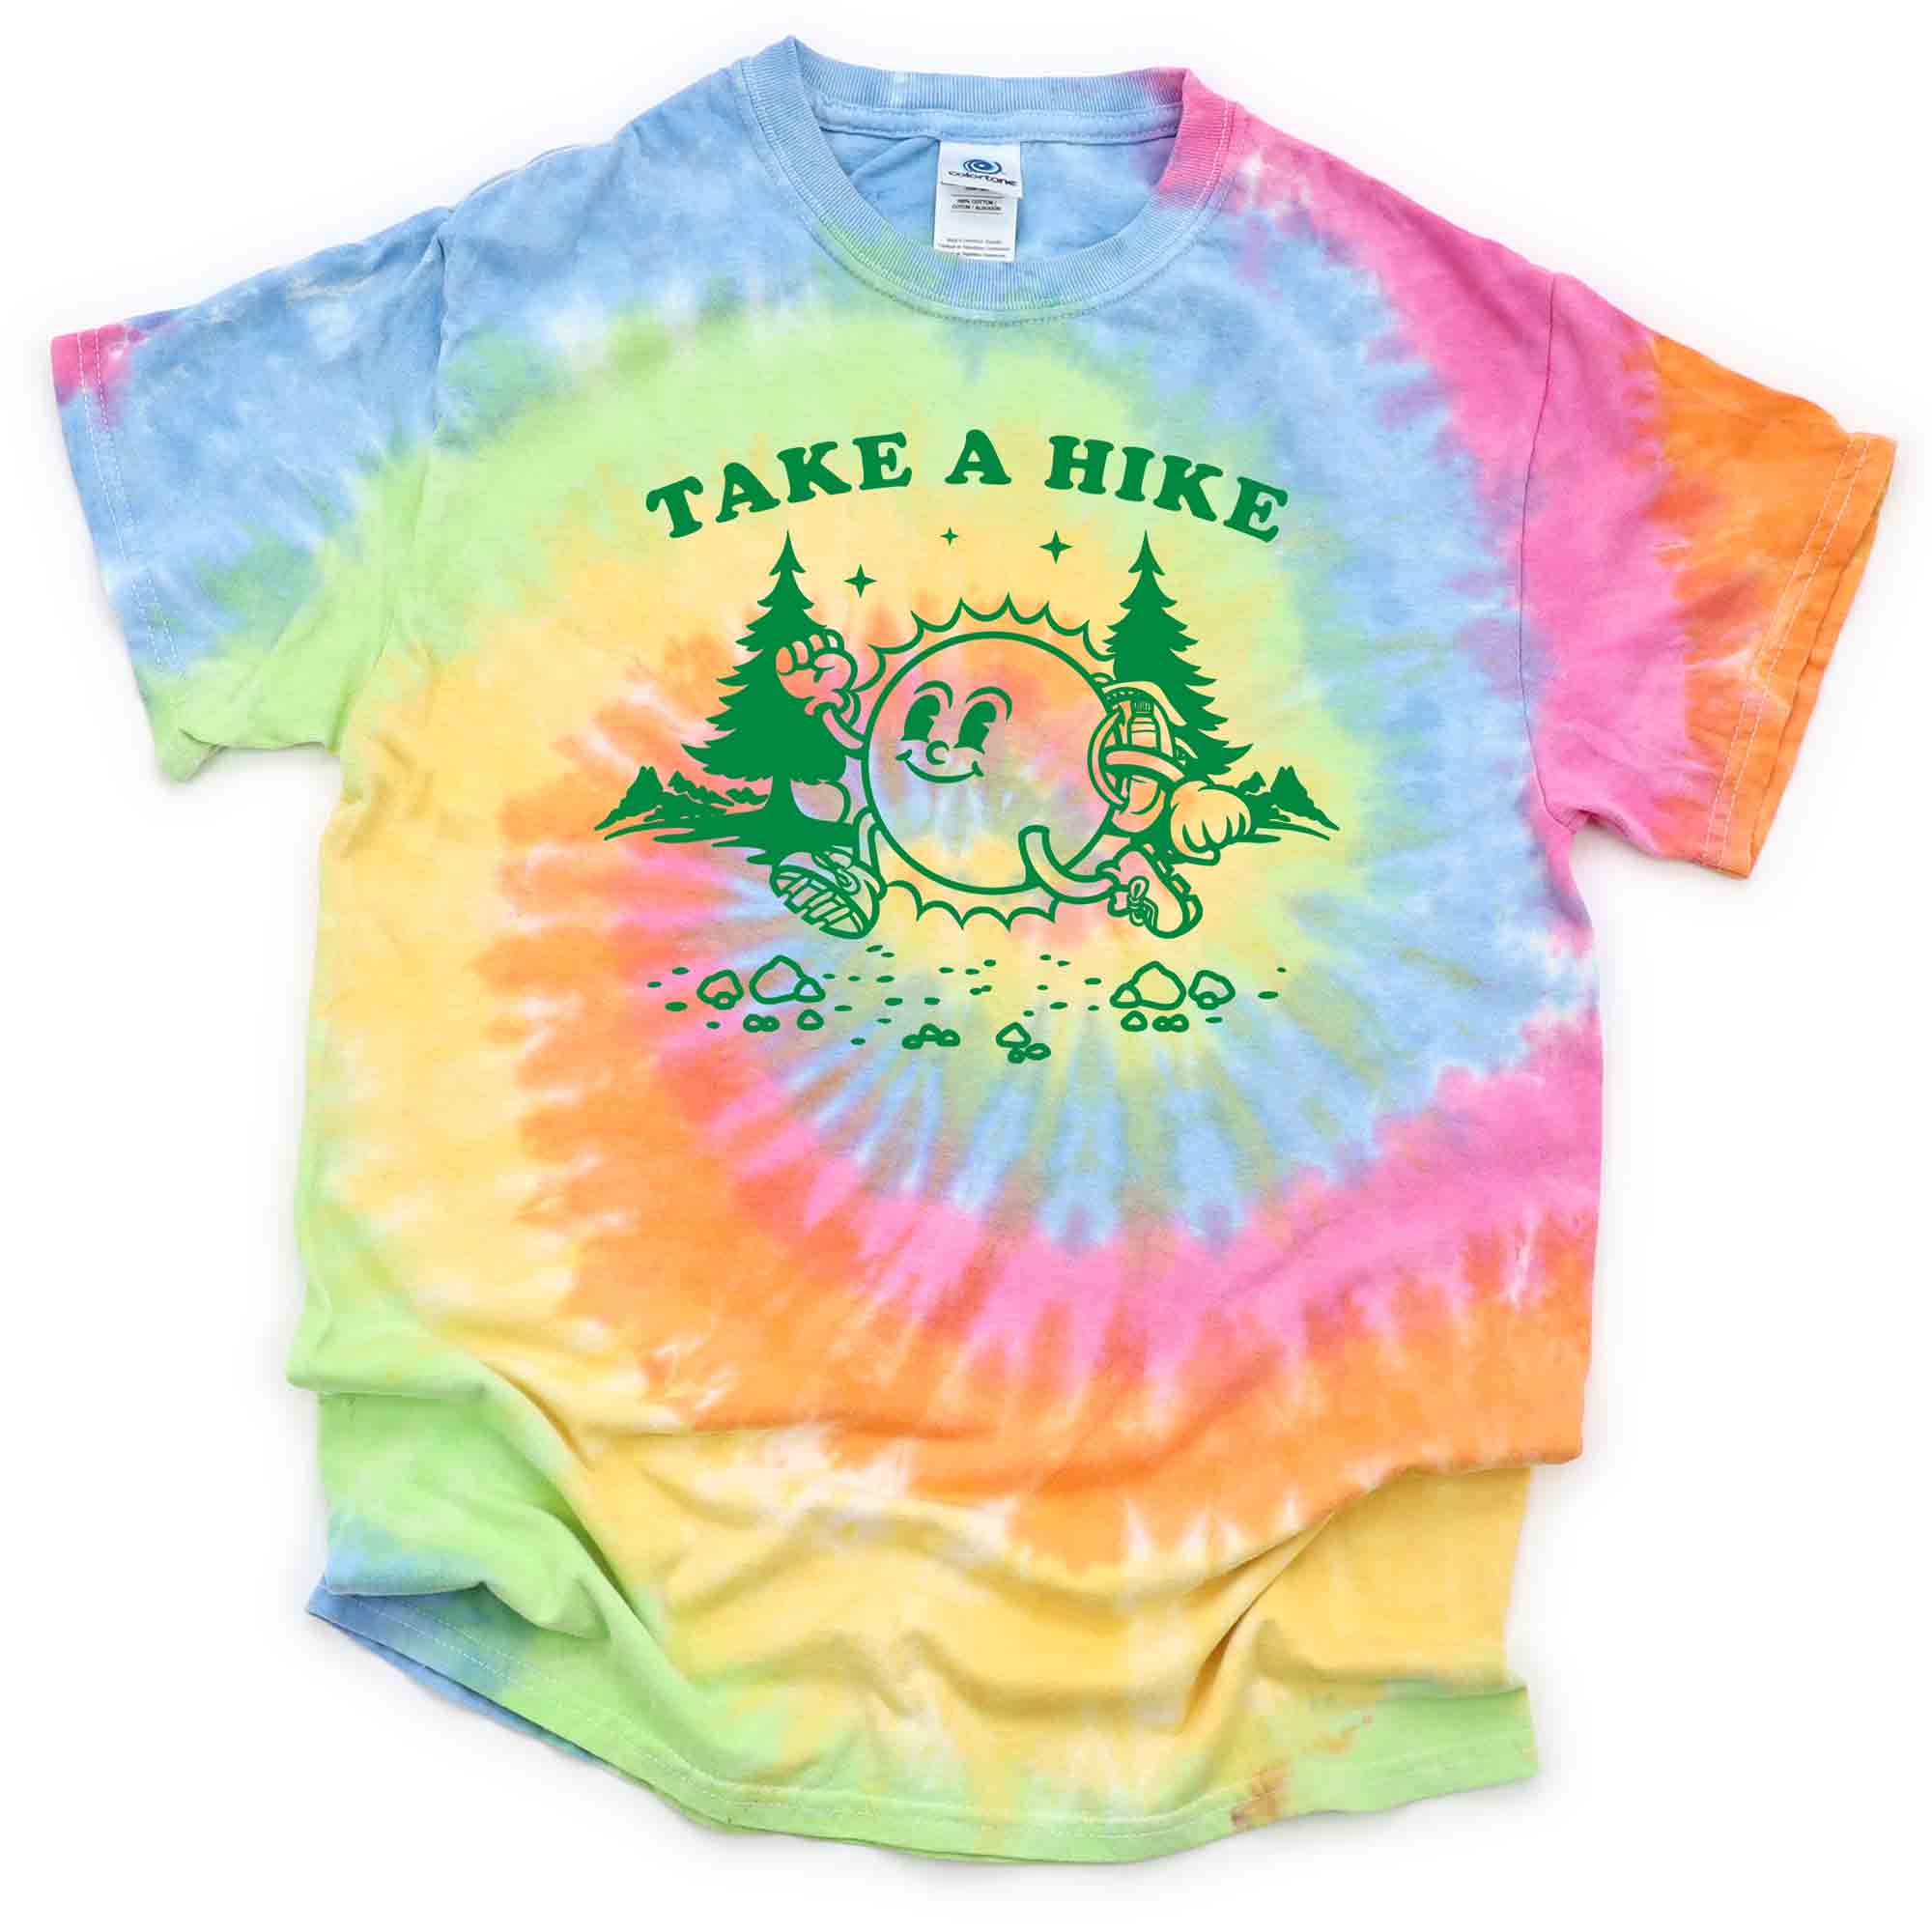 How To Tie Dye a Graphic Shirt 